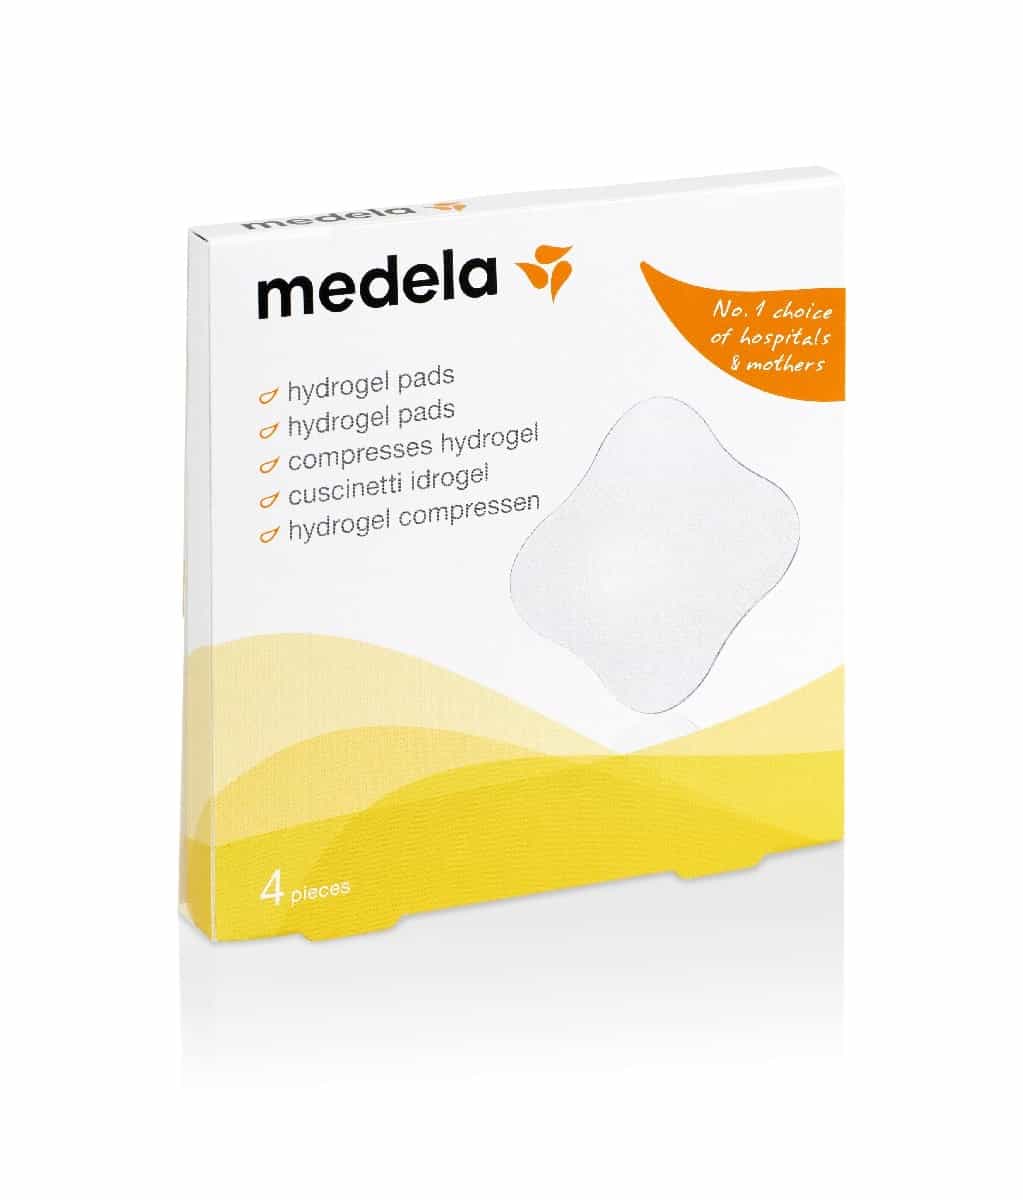 https://nappies.co.nz/wp-content/uploads/2023/02/pack_hydrogel-pads.jpg